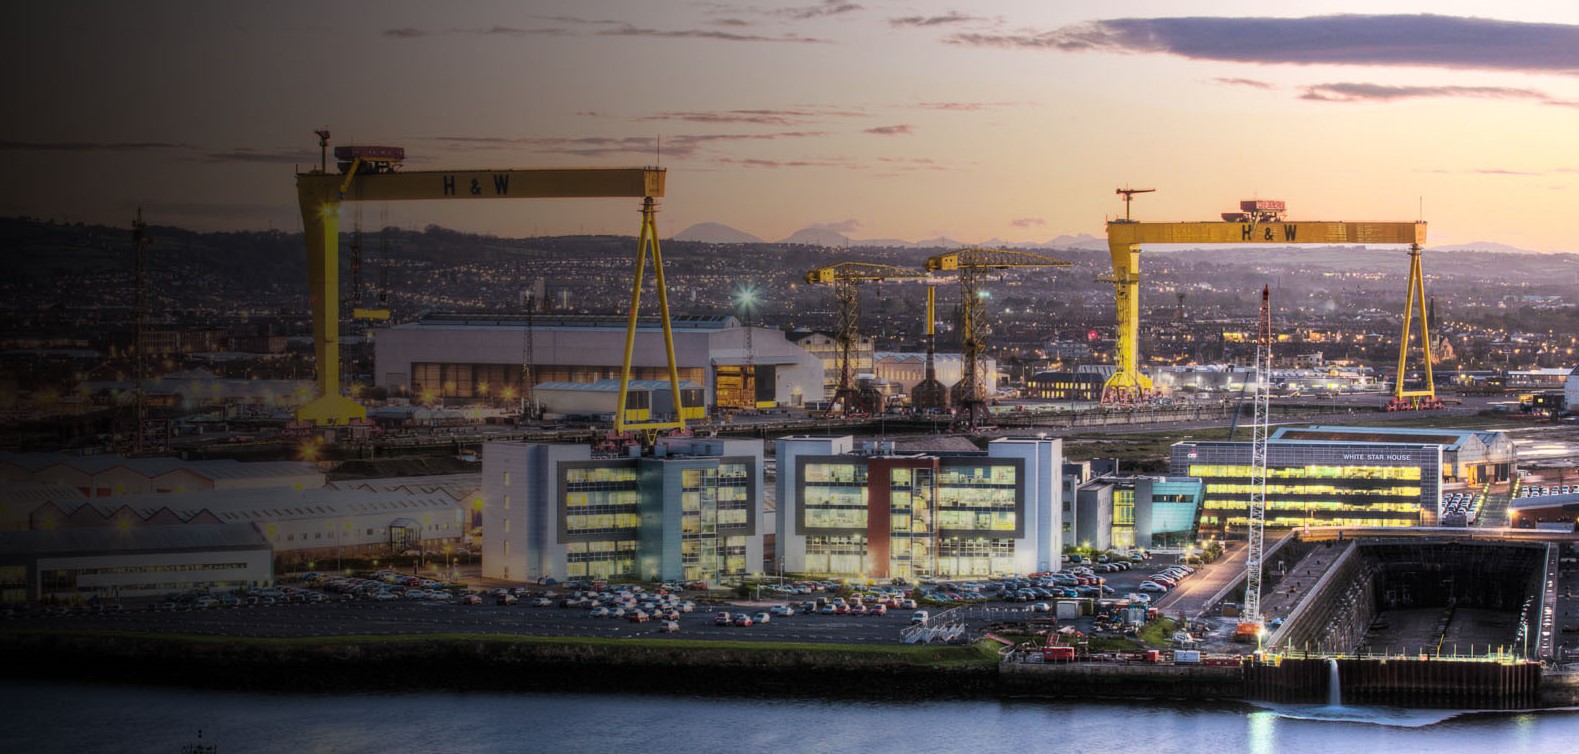 Belfast evening skyline showing shipyard cranes and buildings in foreground and Mourne Mountains in distance